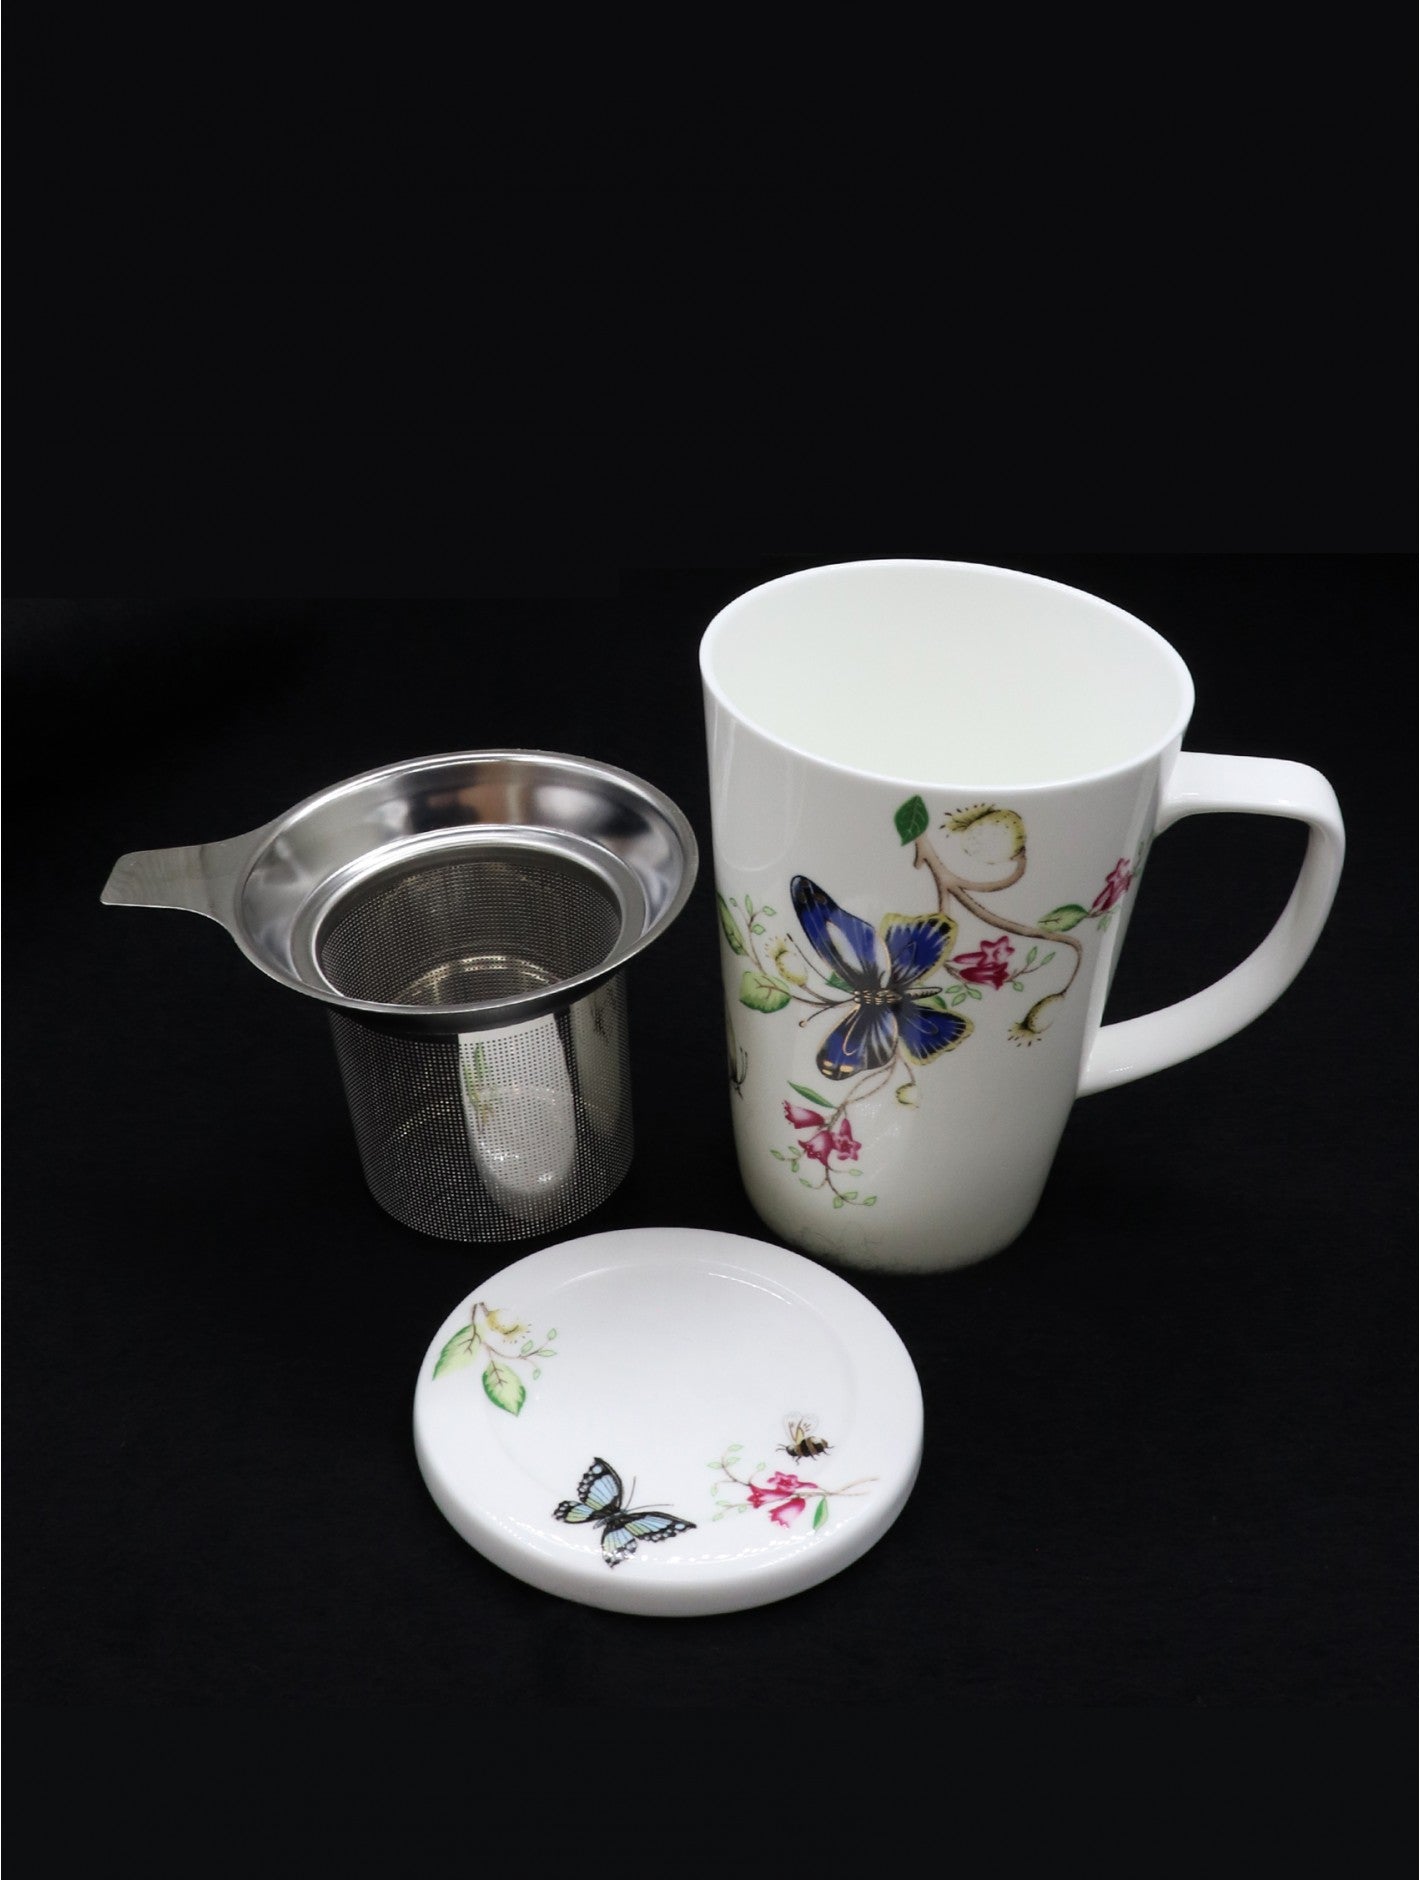 White tea mug with a picture of a butterfly on a red flower vine.  Laying beside it is an infuser that fits in the mug and the lid.  The lid is decorated with small images of a small butterfly and flowers.